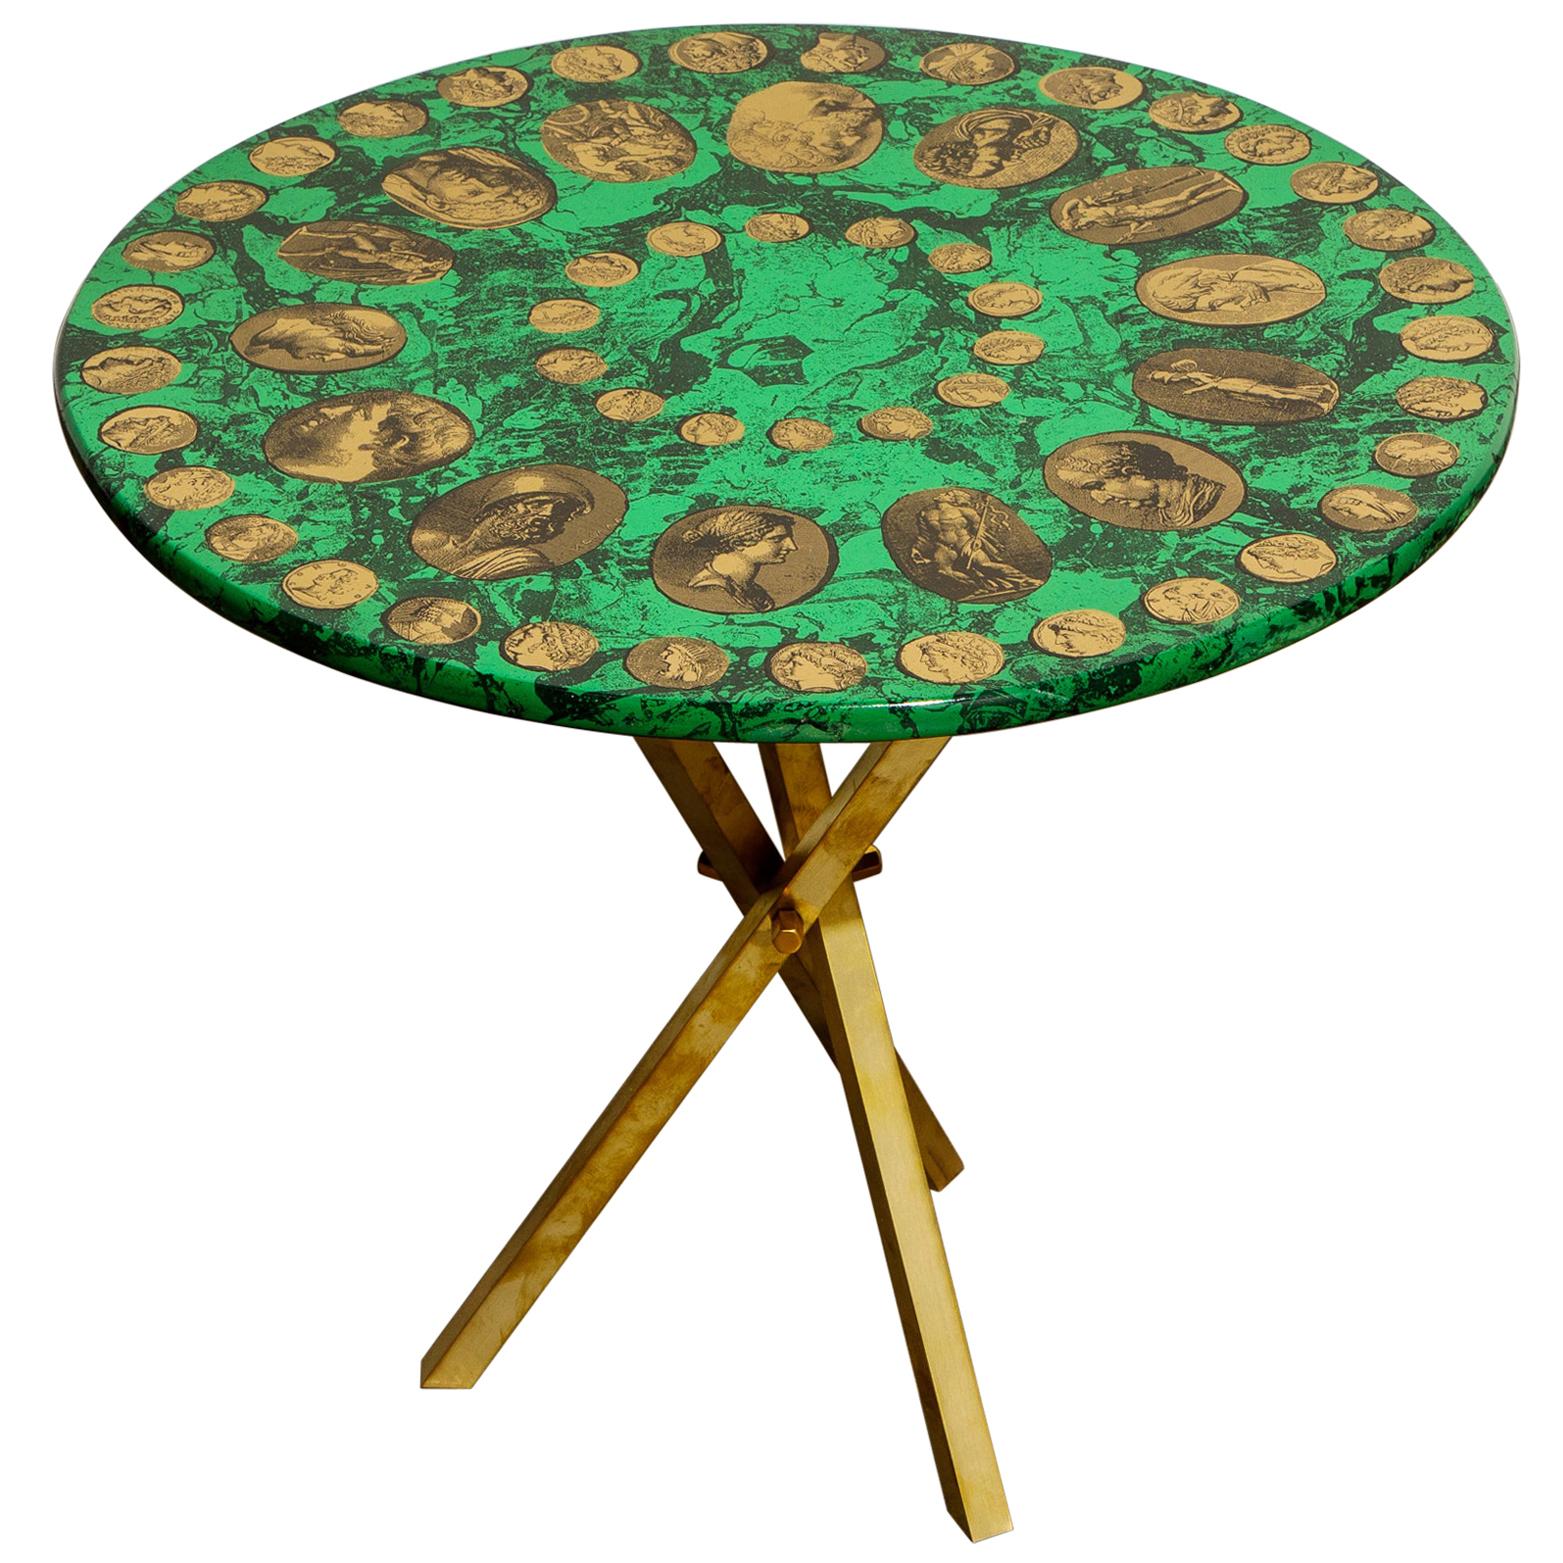  Piero Fornasetti Green and Gold 'Cammei' Side Table, circa 1970s, Signed 